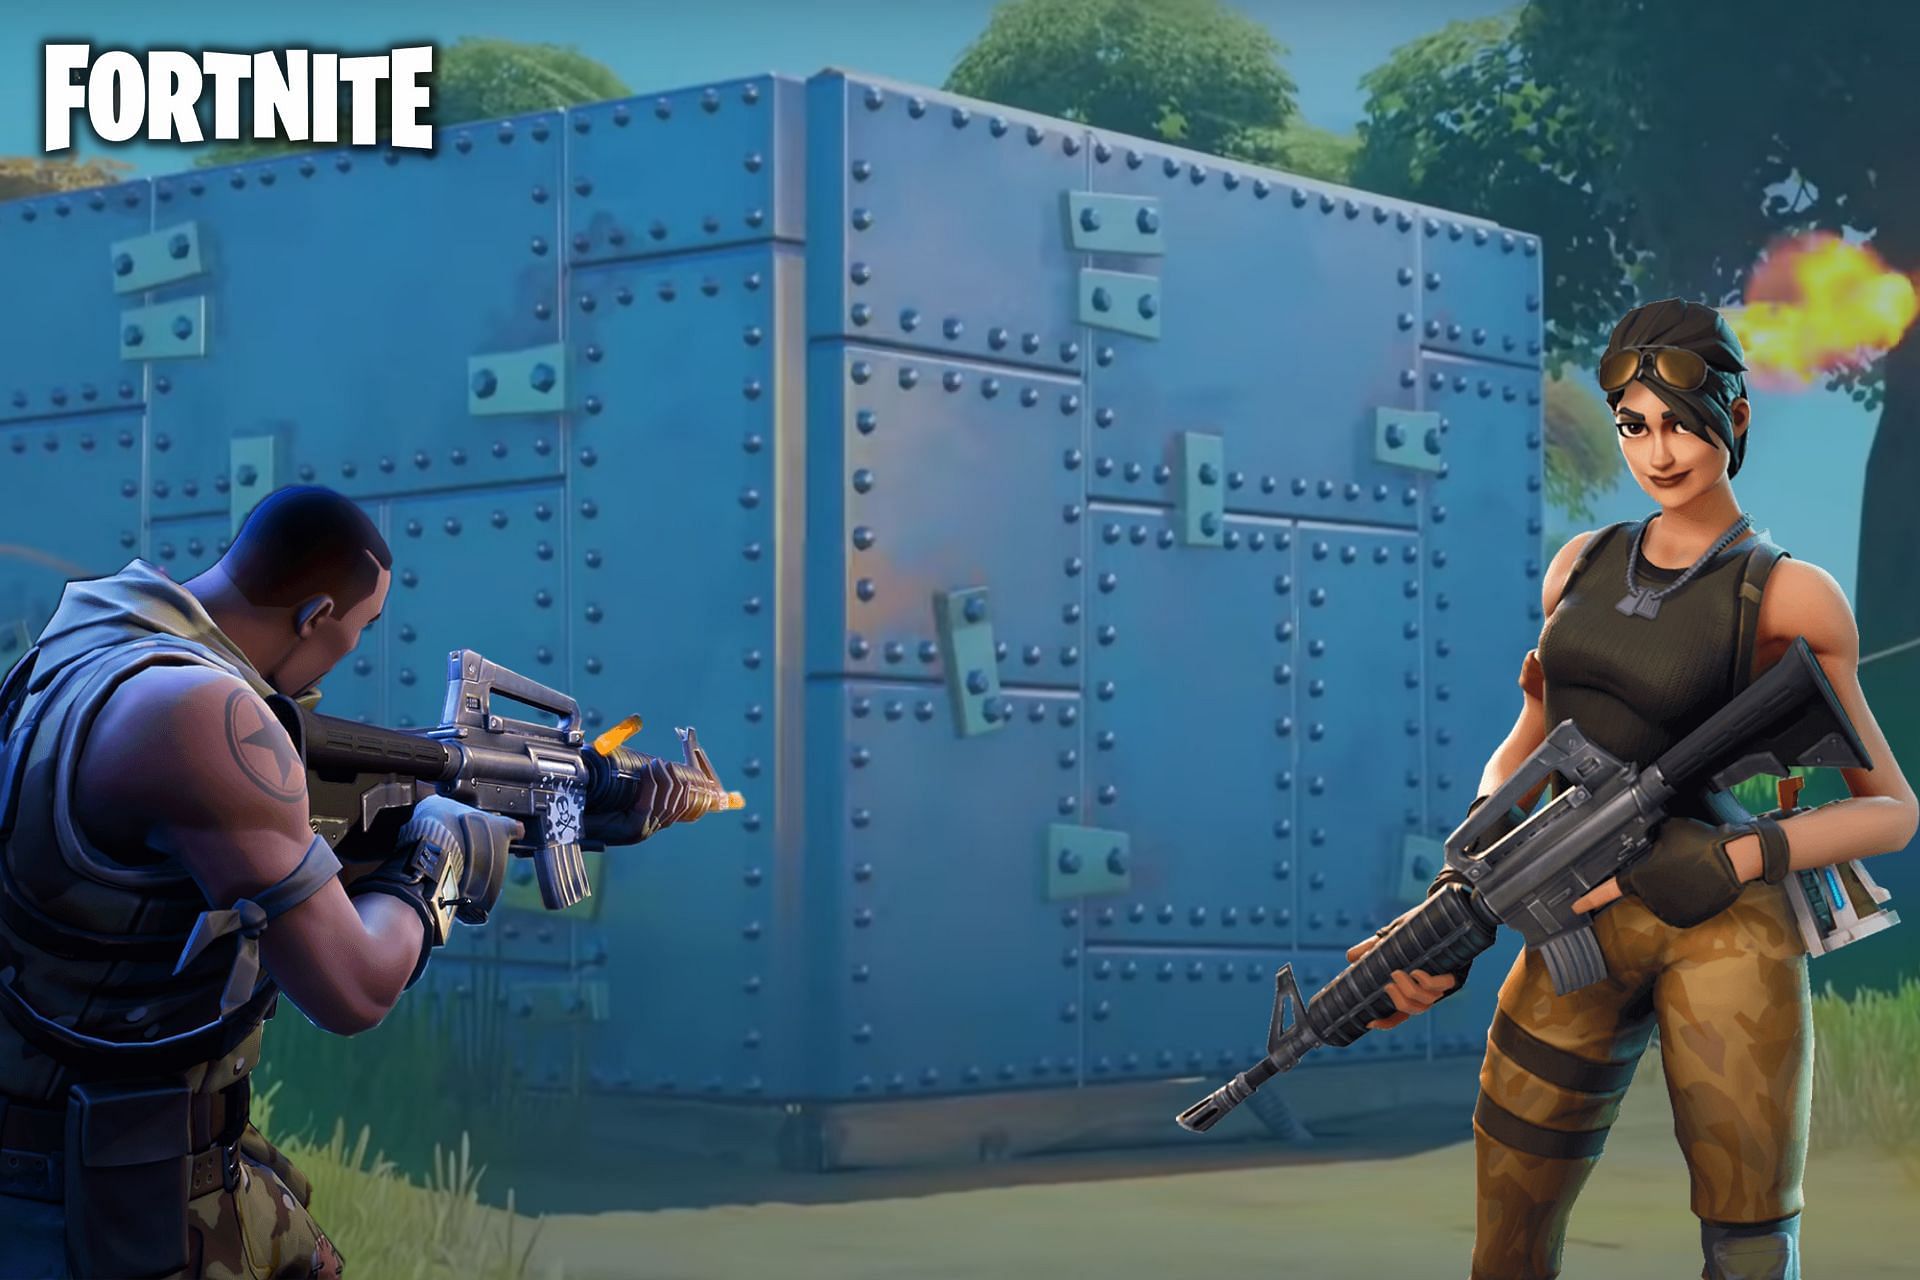 Fortnite YouTuber SypherPK discovers bug to break Armored Walls without any bullets (Image via Sportskeeda)